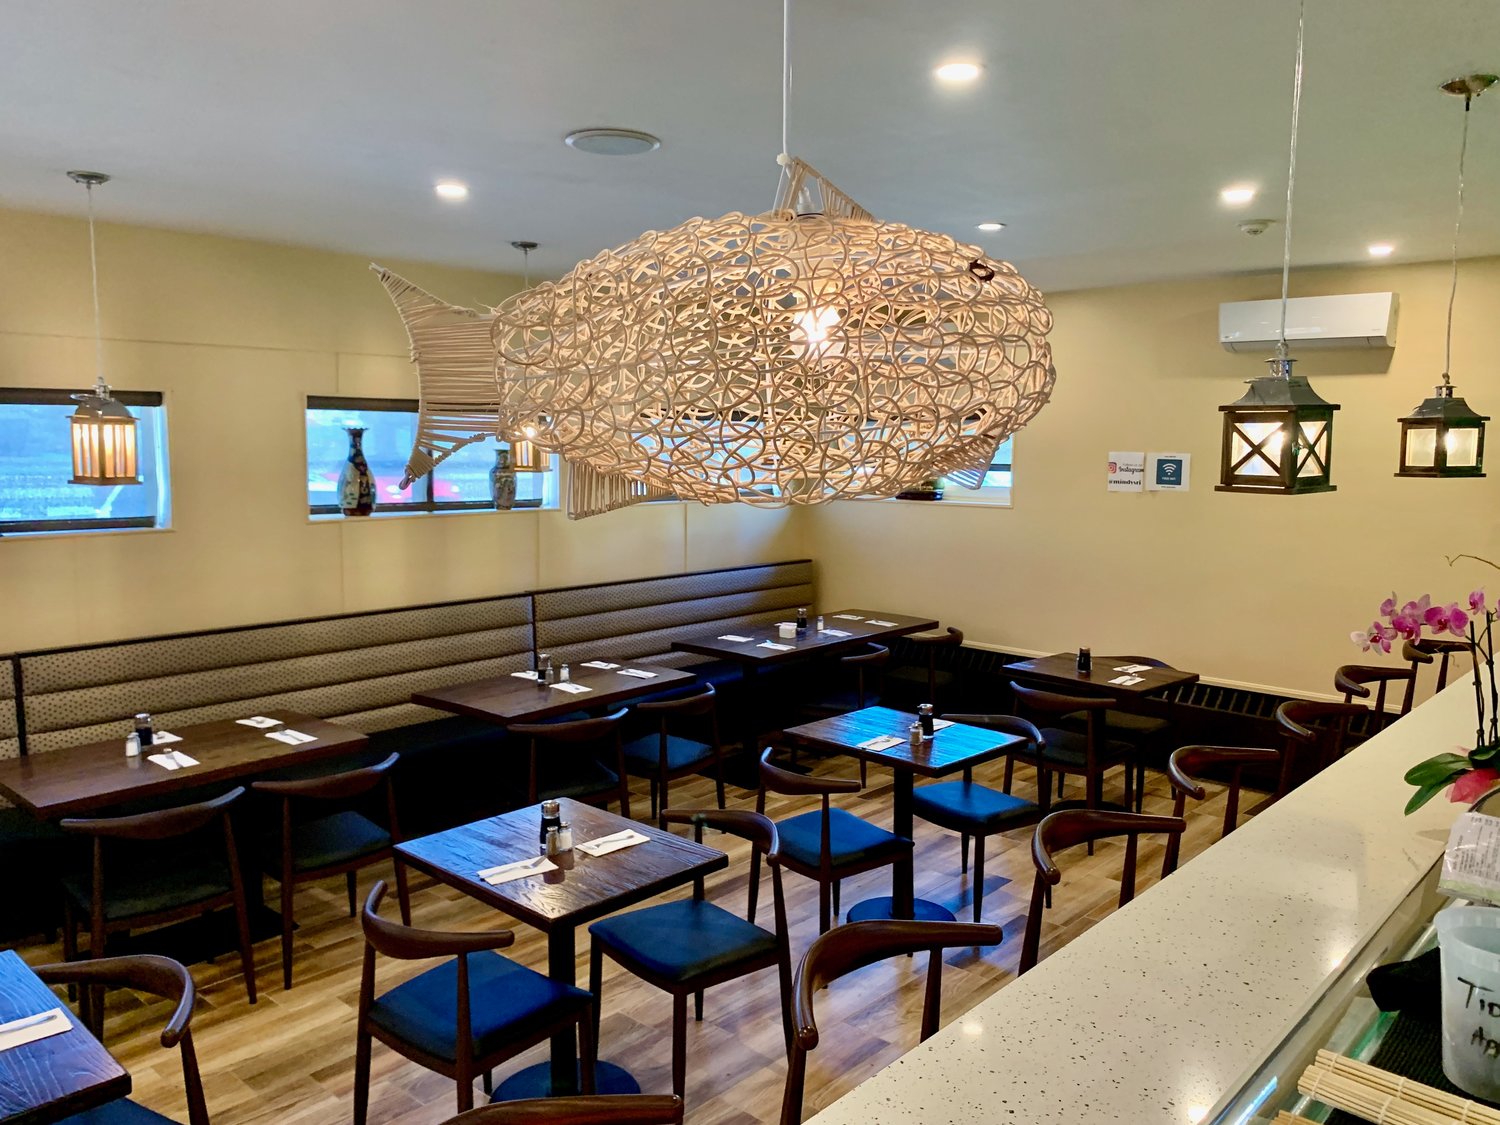 The interior of the former Reidy’s Family Restaurant underwent a complete transformation over the past year.